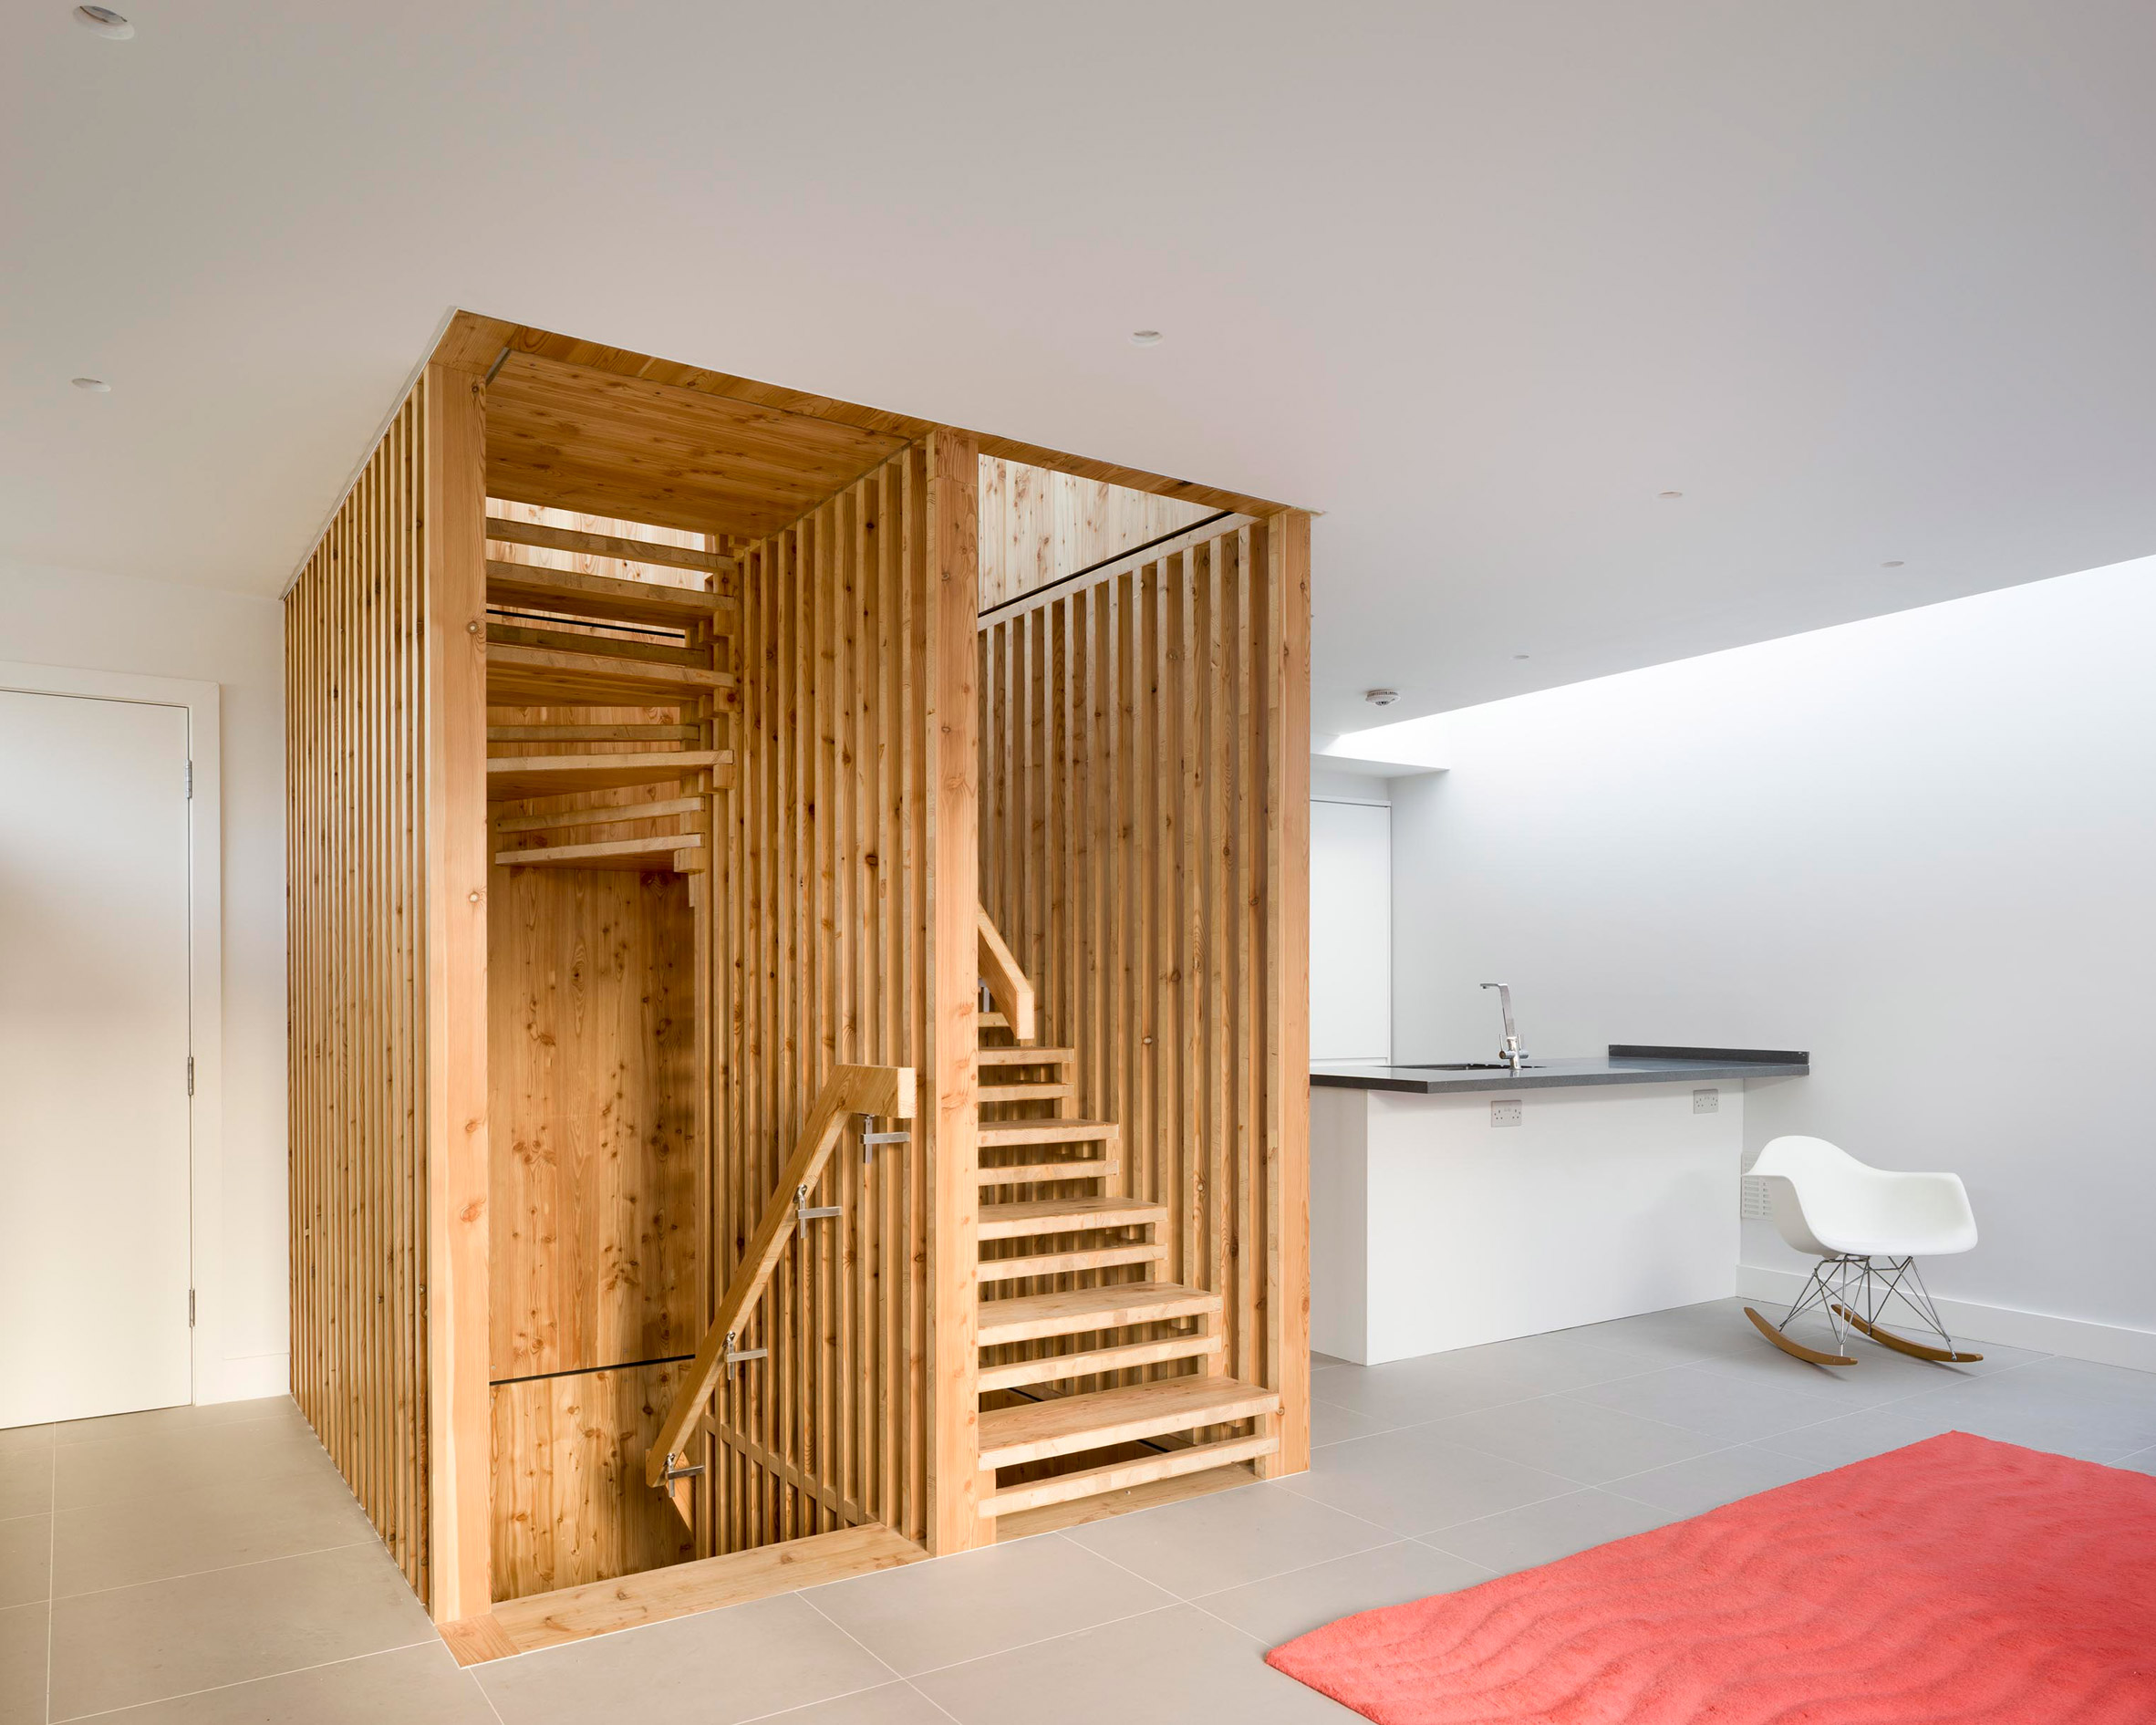 Hundreds of timber components form statement staircase for London house